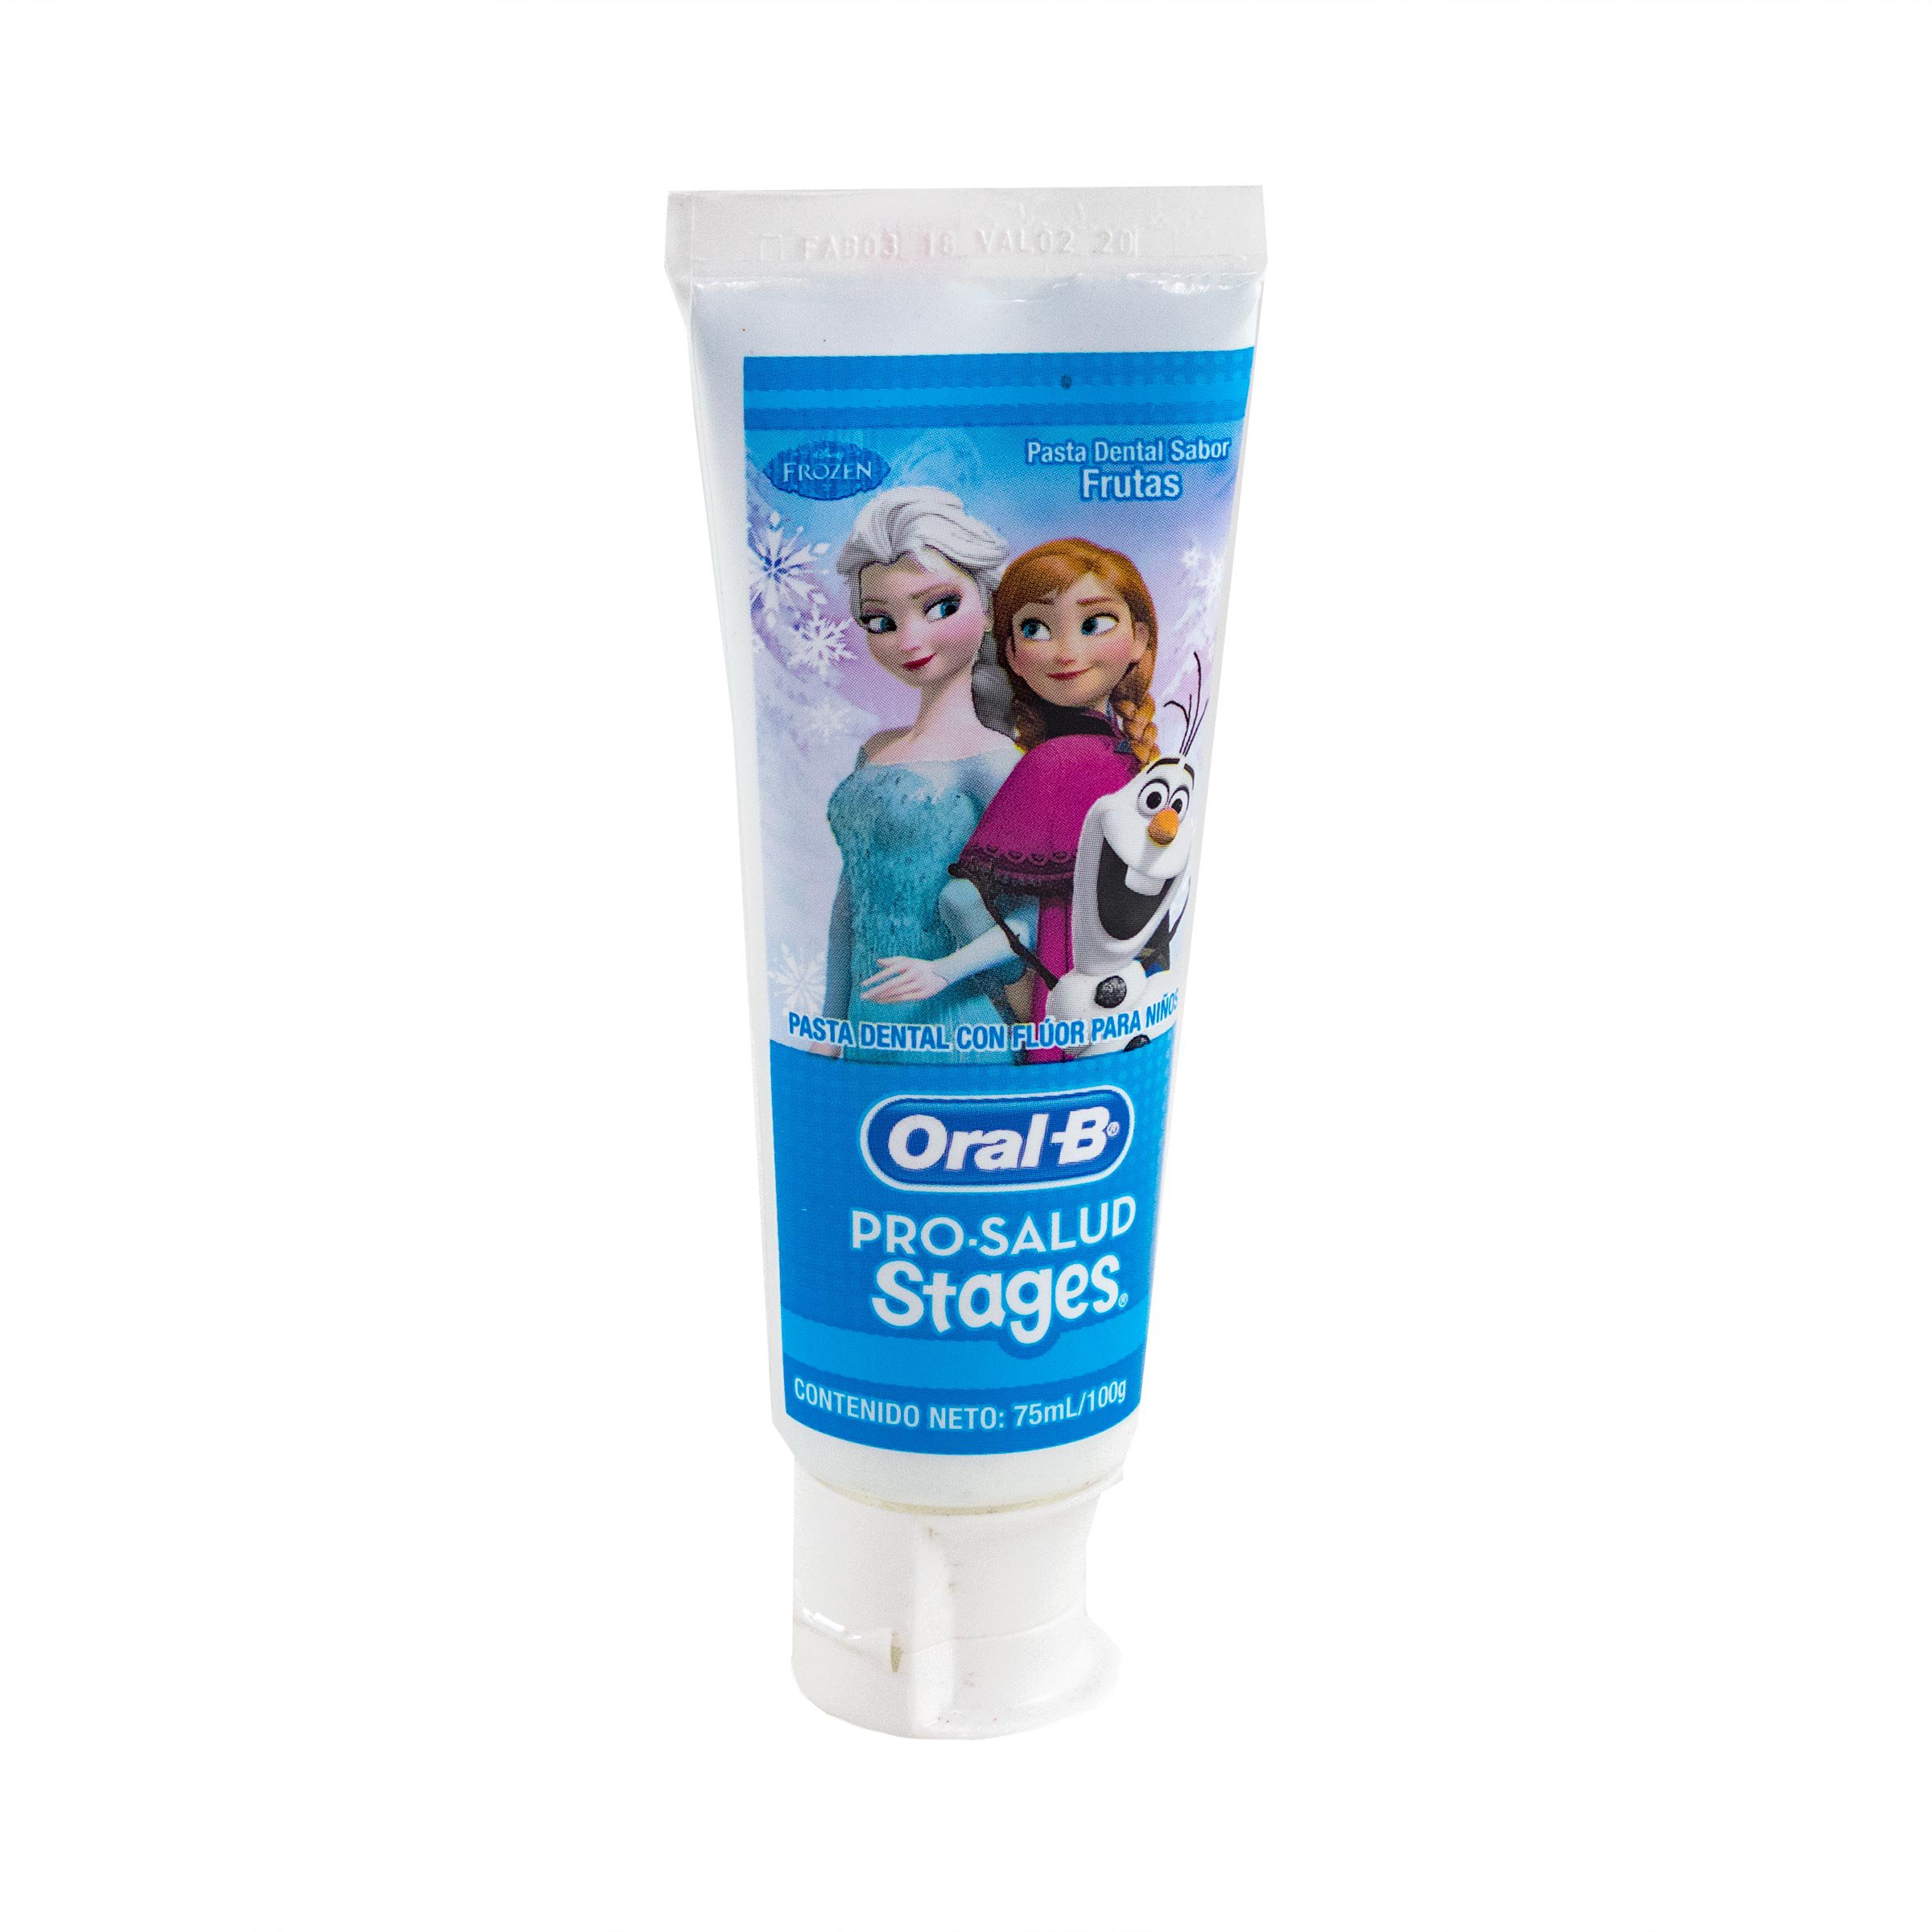 ORAL-B CR DENT STAGES 75 ML FROZEN